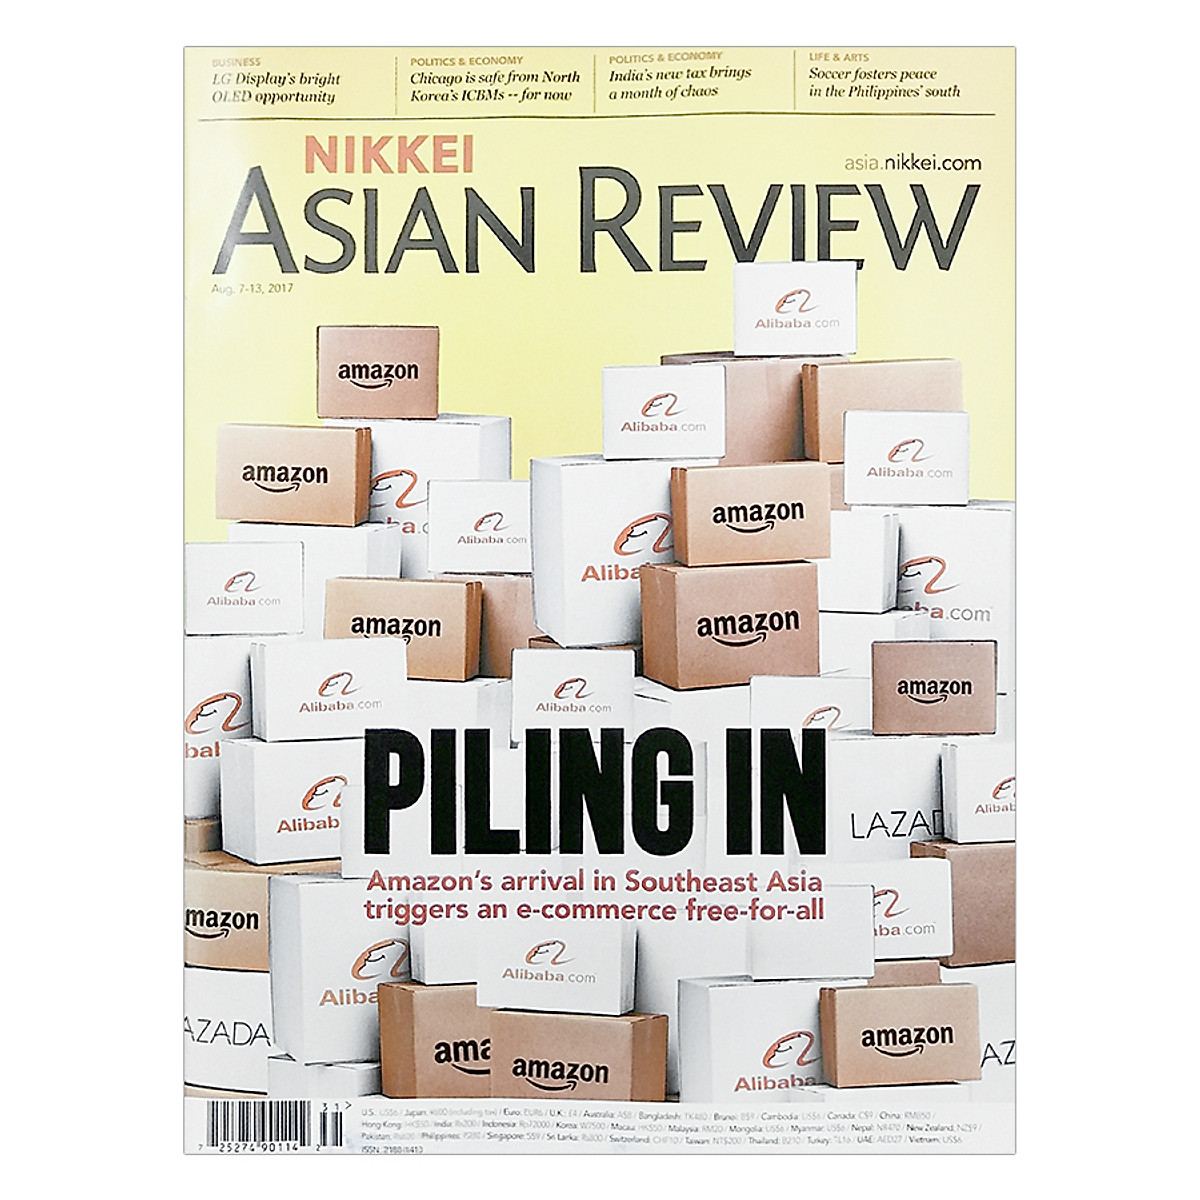 Nikkei Asian Review: Piling In - 31